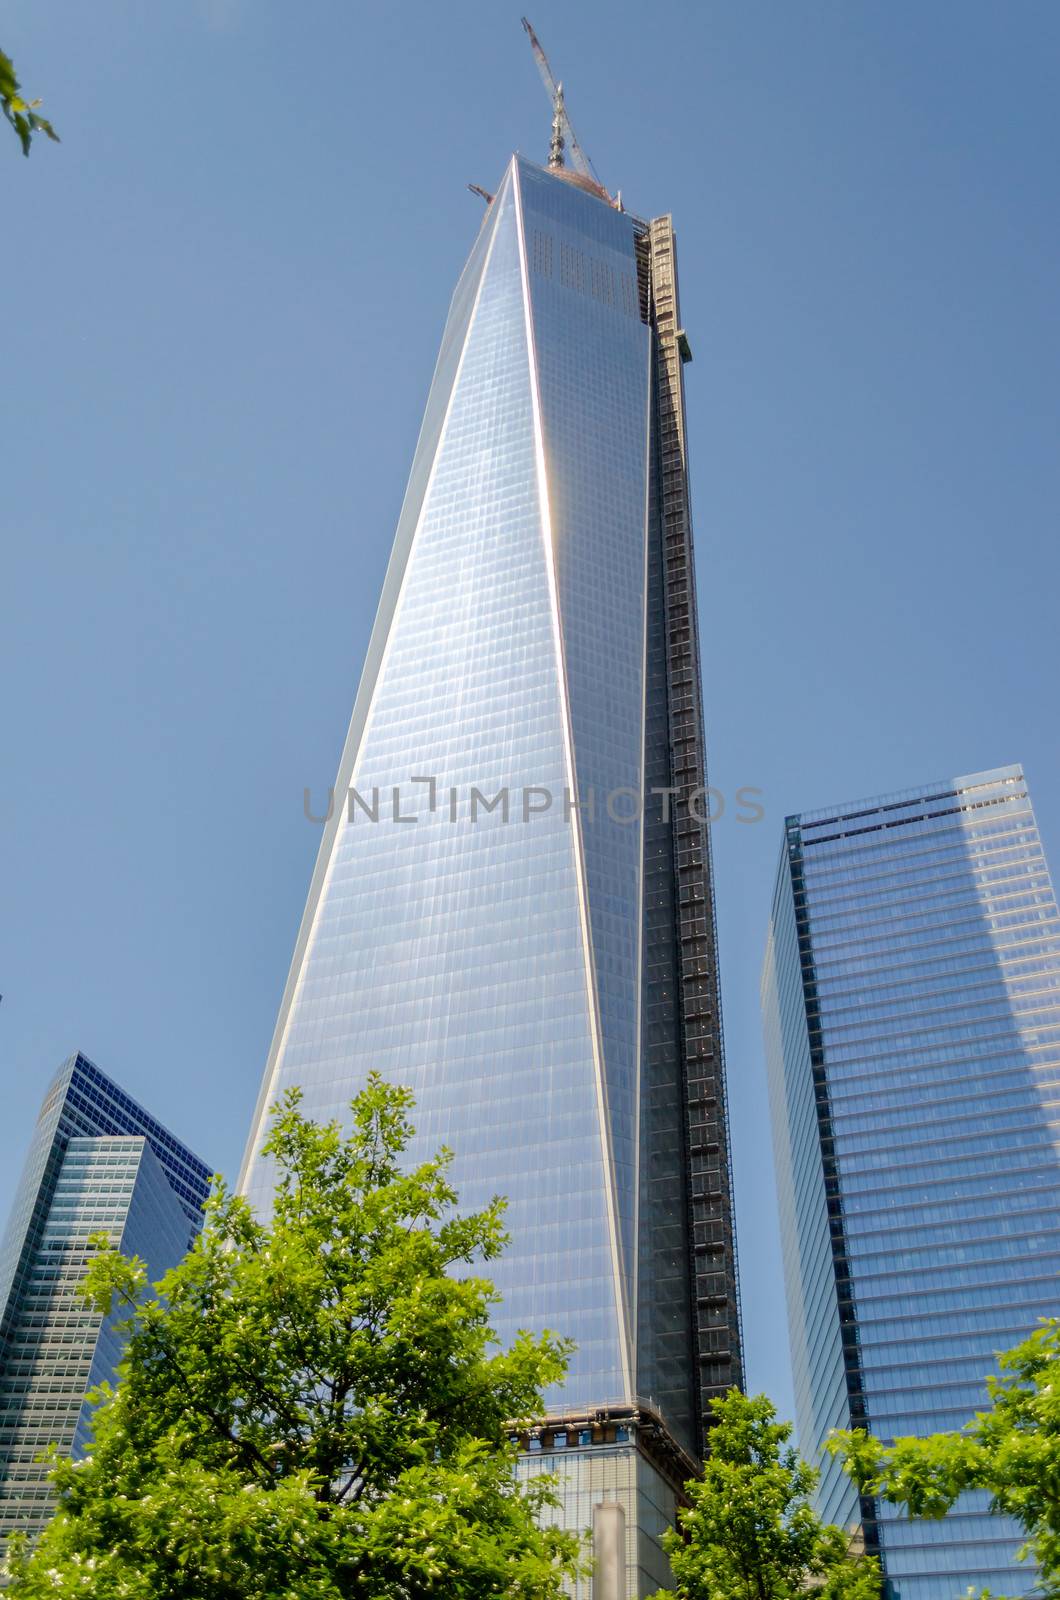 NEW YORK - MAY 27: One World Trade Center (also known as the Freedom Tower) is shown under construction on May 27, 2013 in New York City, New York. 